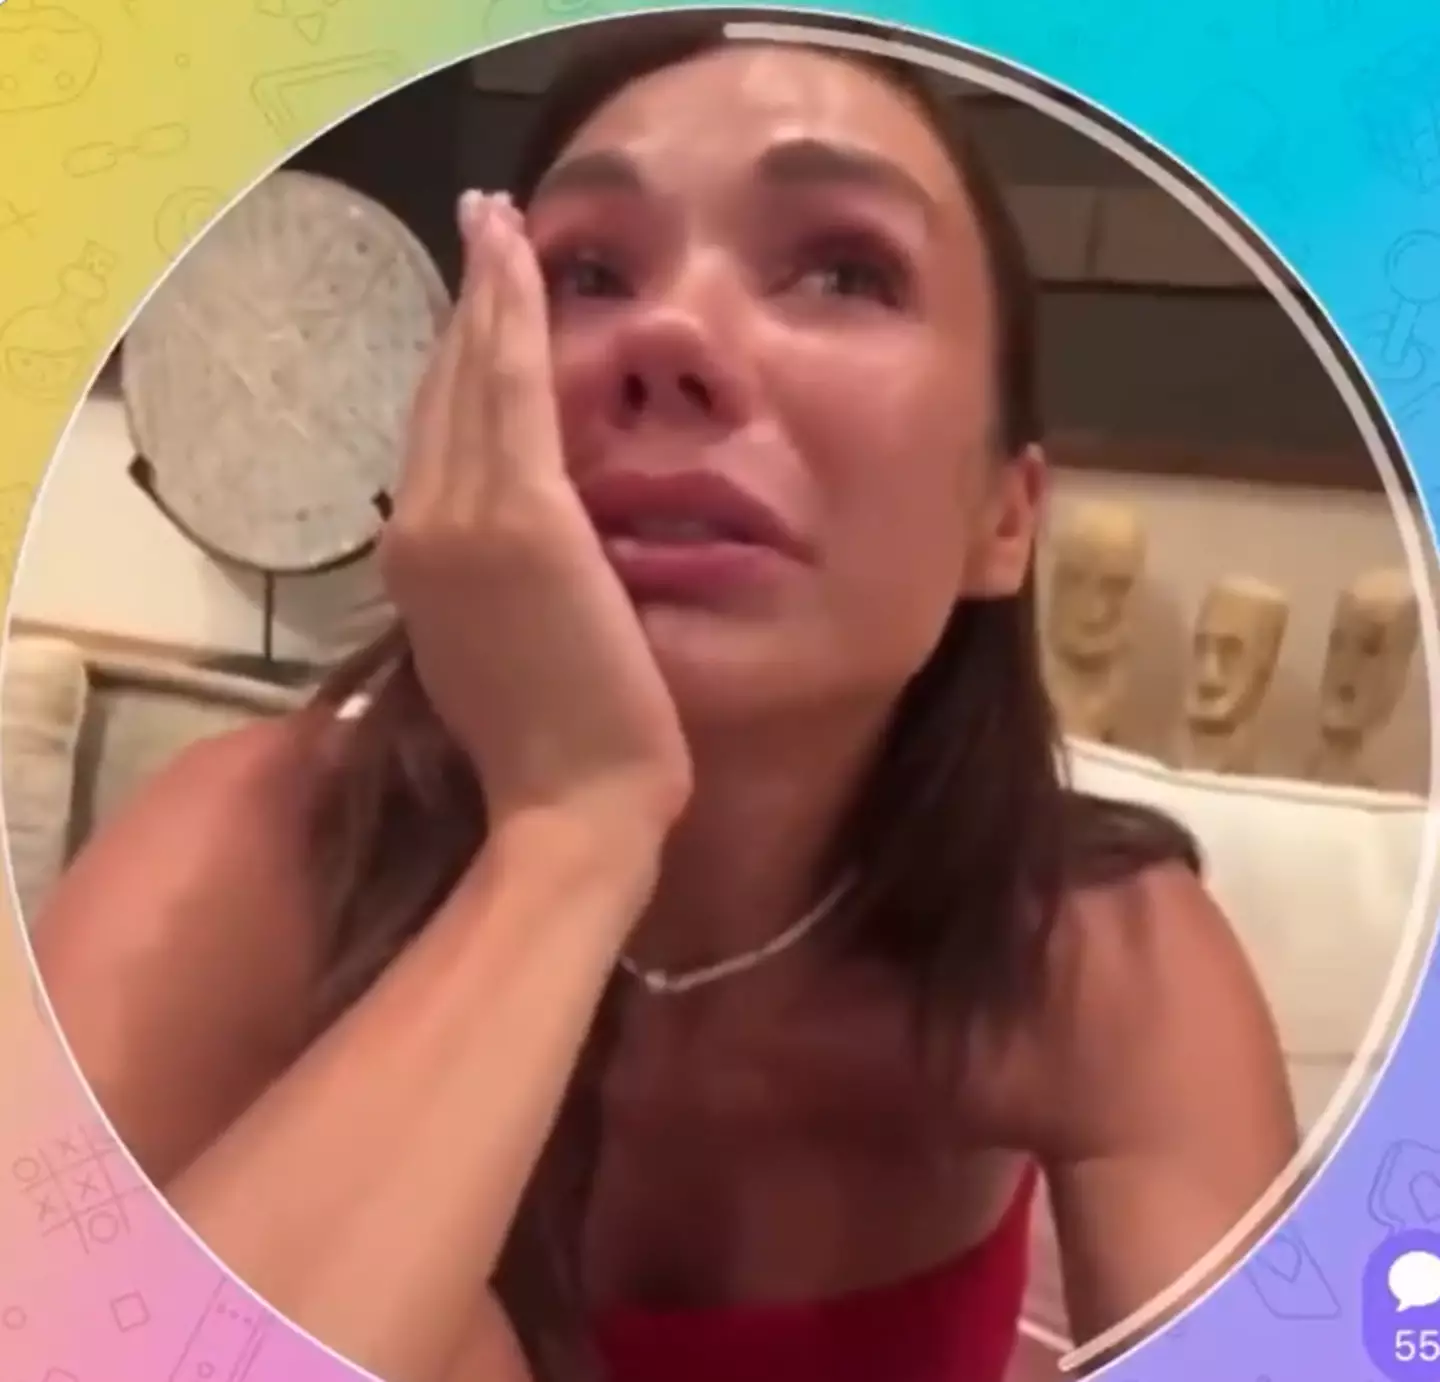 A Russian influencer has been filmed crying about Instagram being banned in the country.